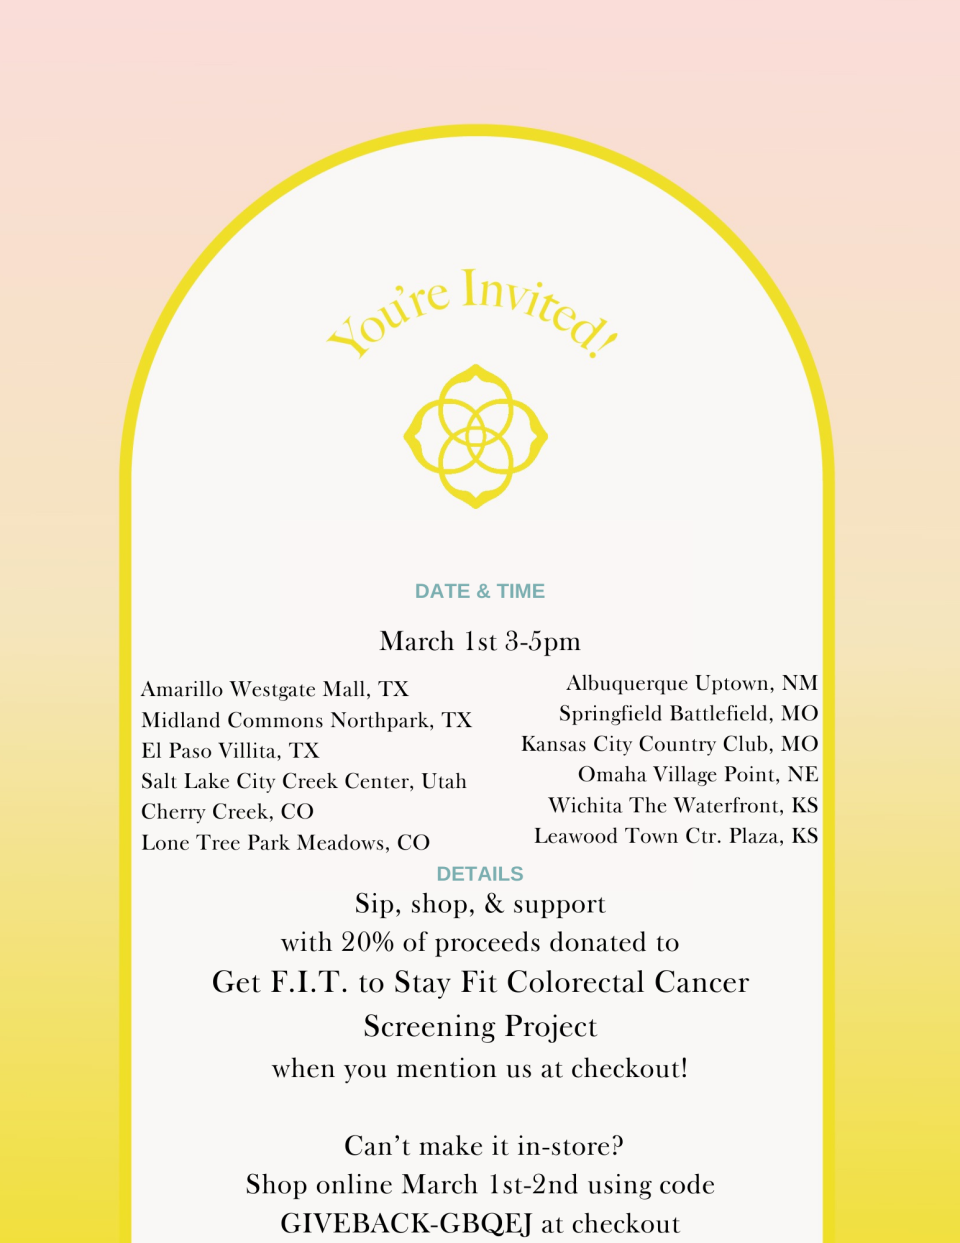 Get F.I.T to Stay Fit, a colorectal cancer screening program at Texas Tech Physicians Surgery, the clinical practice of Texas Tech University Health Sciences Center (TTUHSC) in Amarillo, will benefit from a Kendra Scott shopping event on Friday, with 20 percent of proceeds going toward the program.